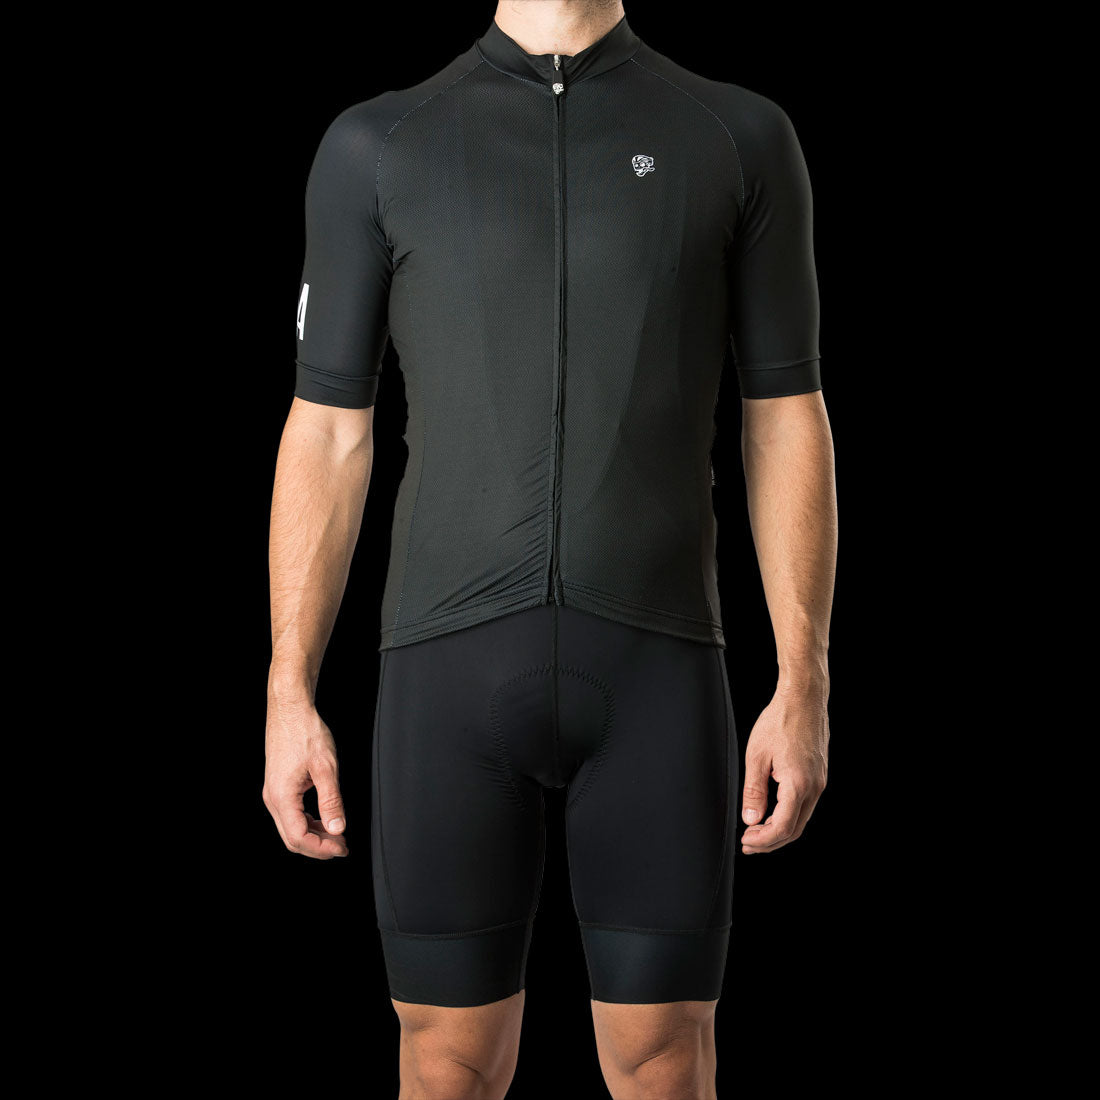 Fit Guide for Attaquer Cycling Kits 